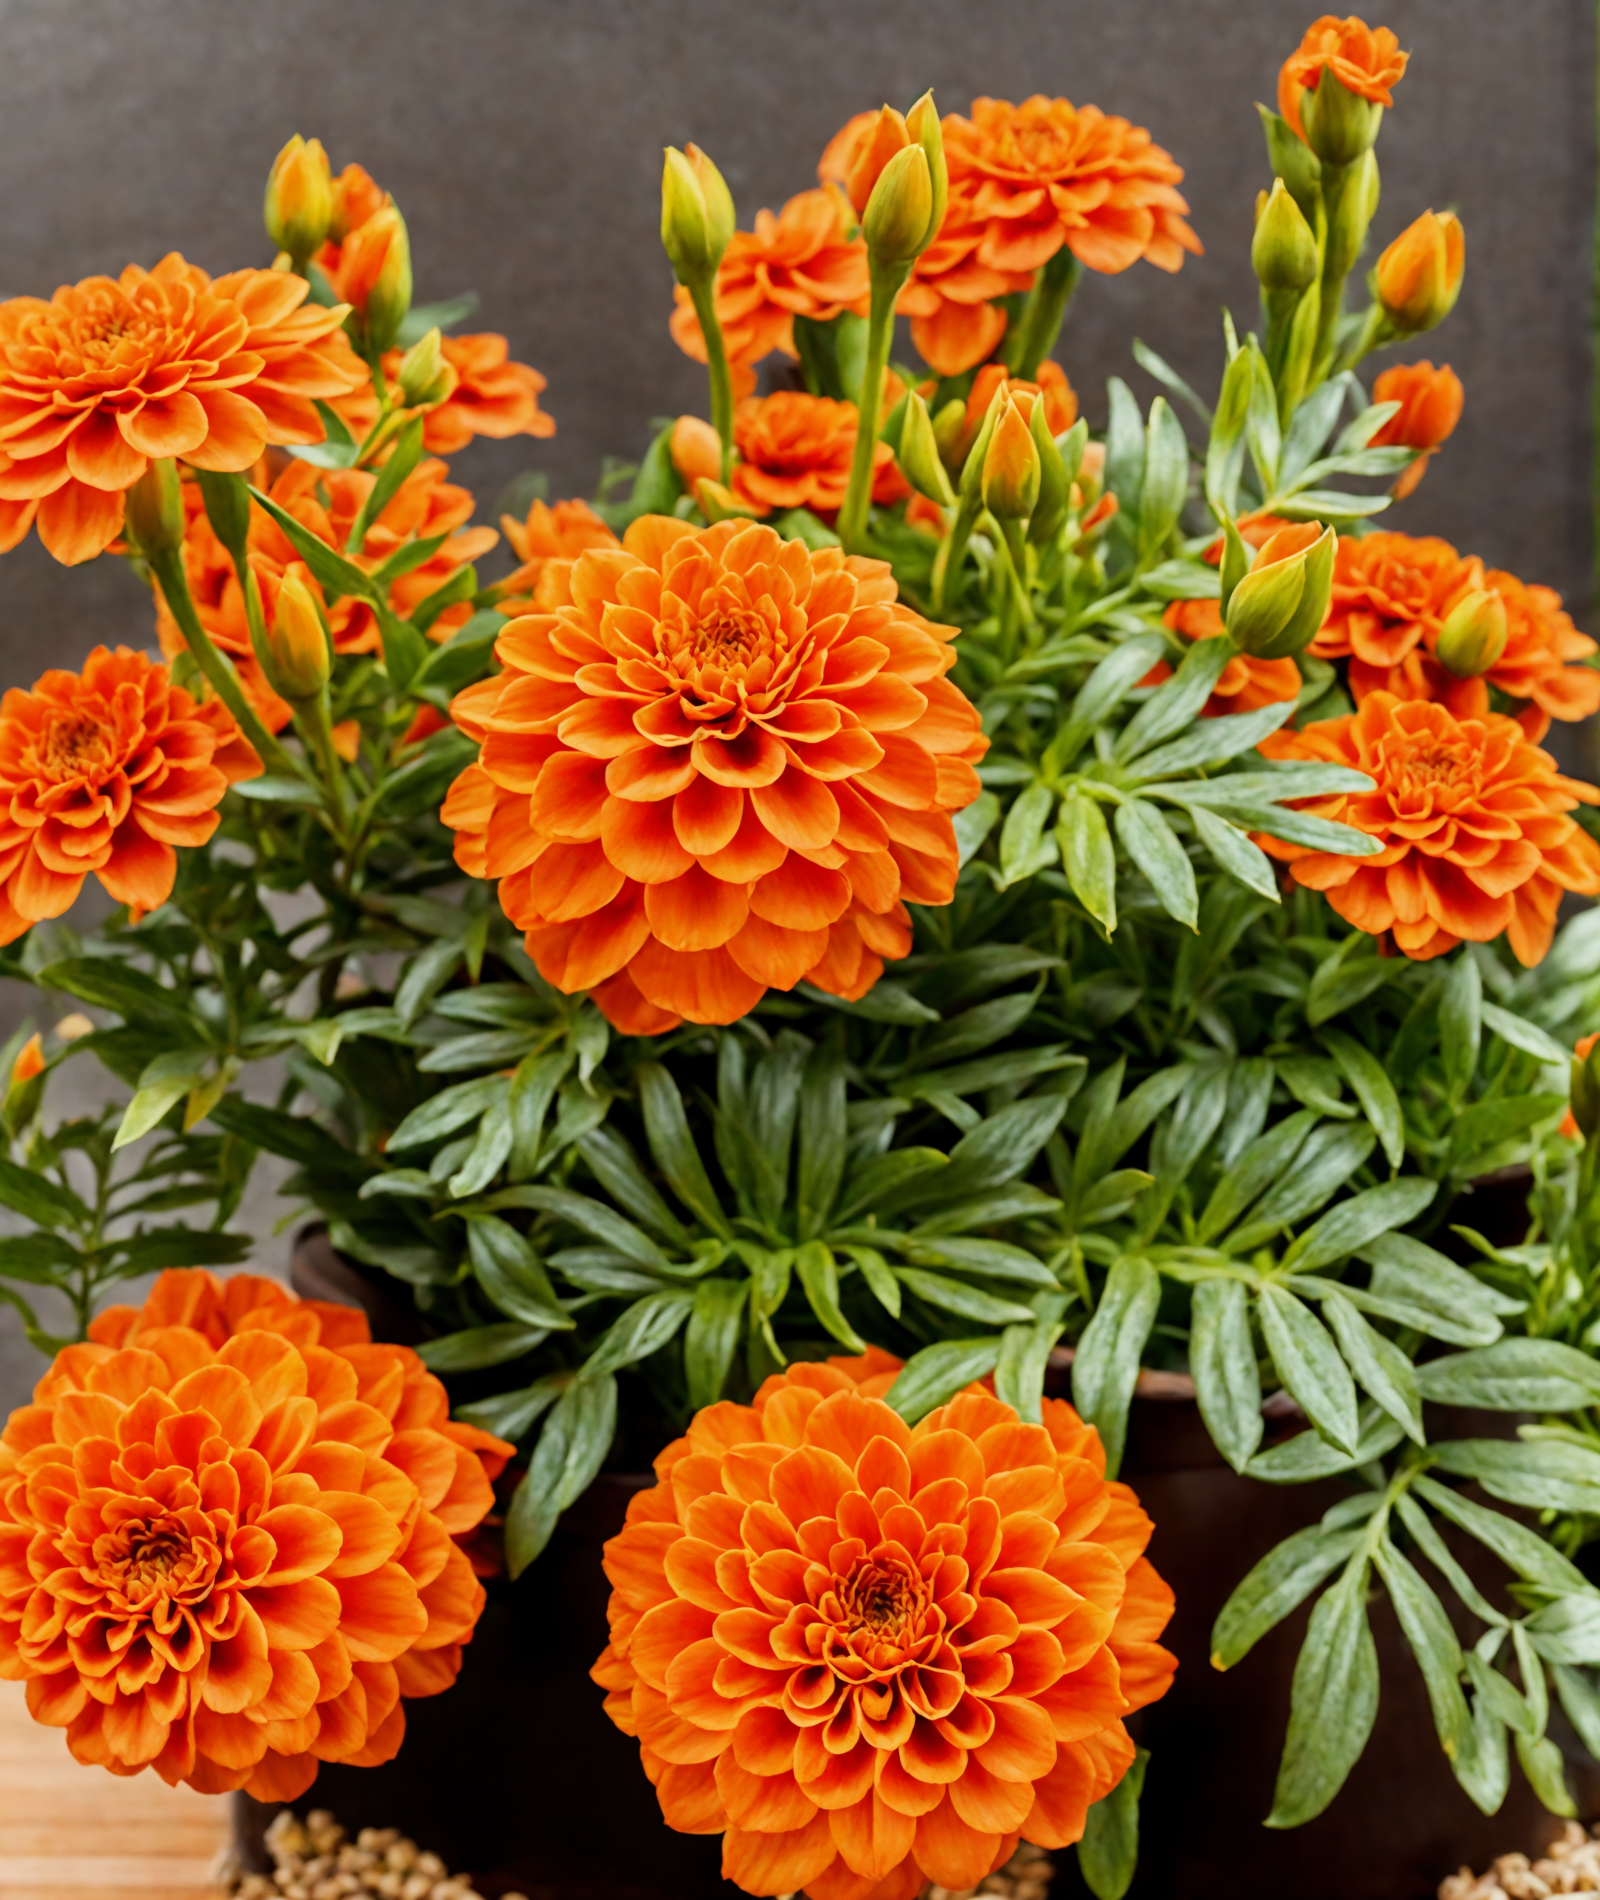 A cluster of vibrant orange Tagetes erecta flowers in a planter, with clear lighting and a dark background.